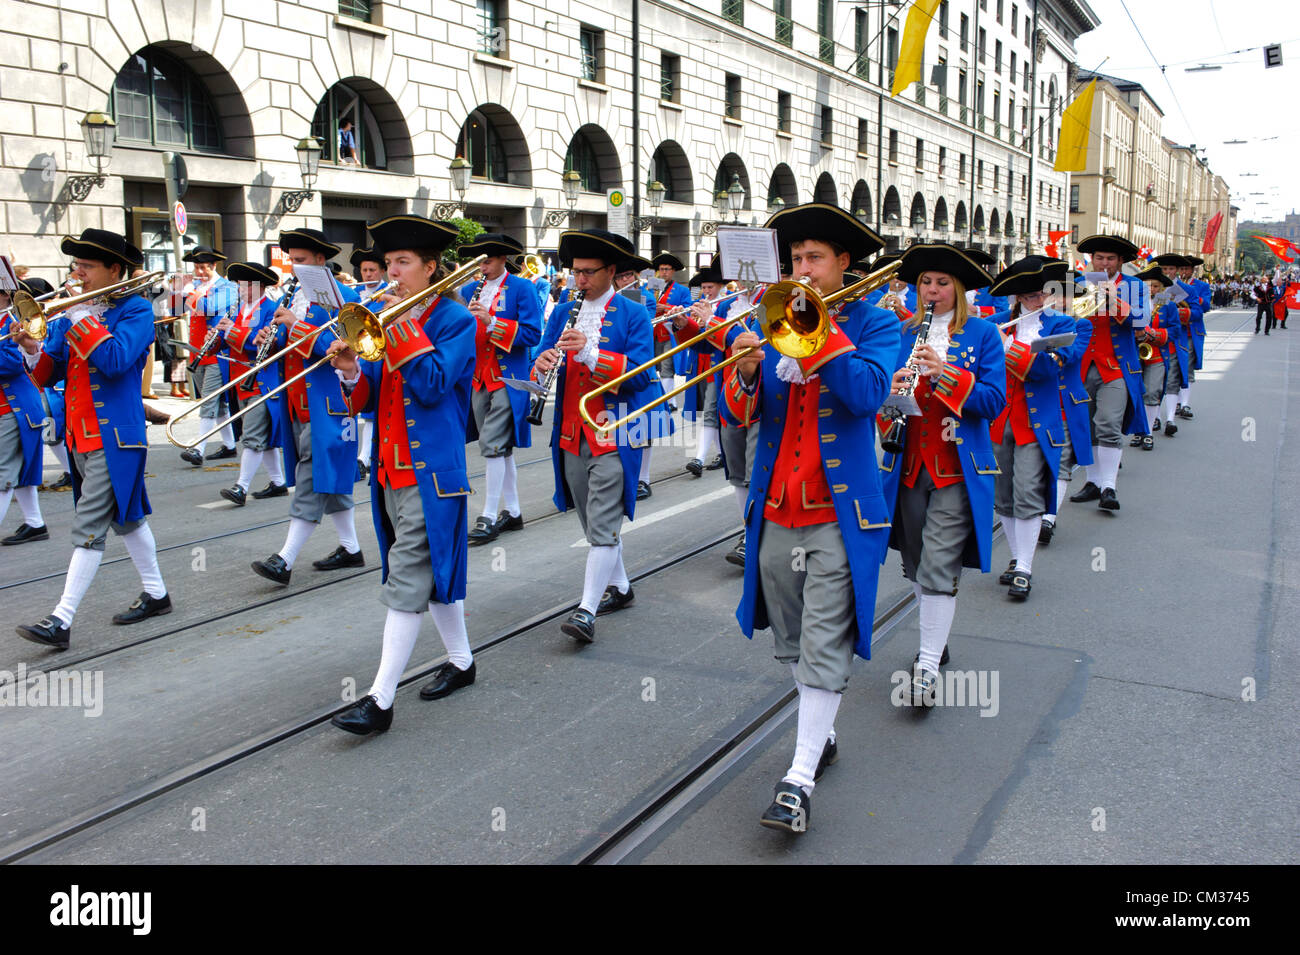 Munich, Germany. 23rd September, 2012. The opening parade of the world's biggest beer-festival, Oktoberfest, proceeds through the city of Munich, Germany. The music brass band of Noerdlingen / Nördlingen, in historical costumes, was part of 8900 participants of this public parade. Stock Photo